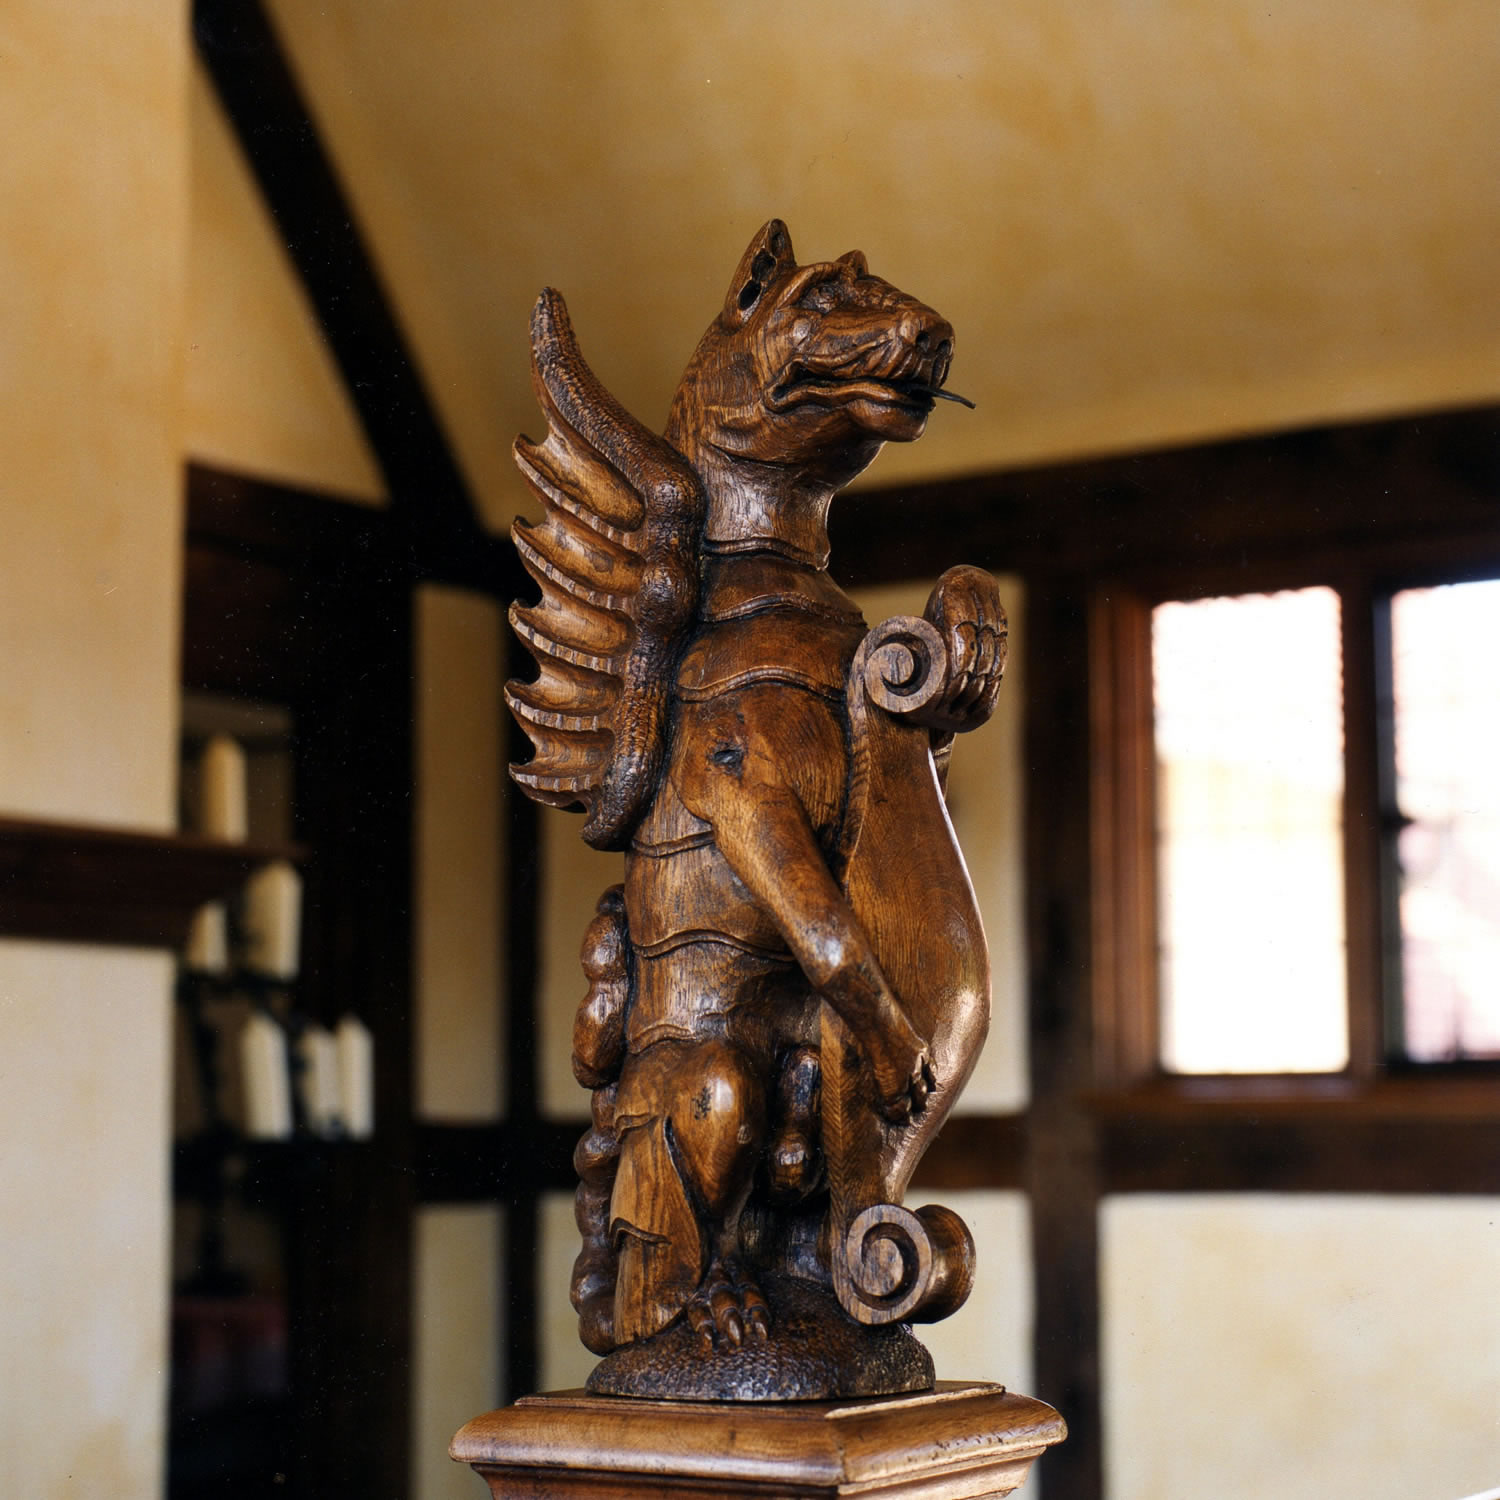 Special commision for a hand-carved Wyvern finial in solid oak